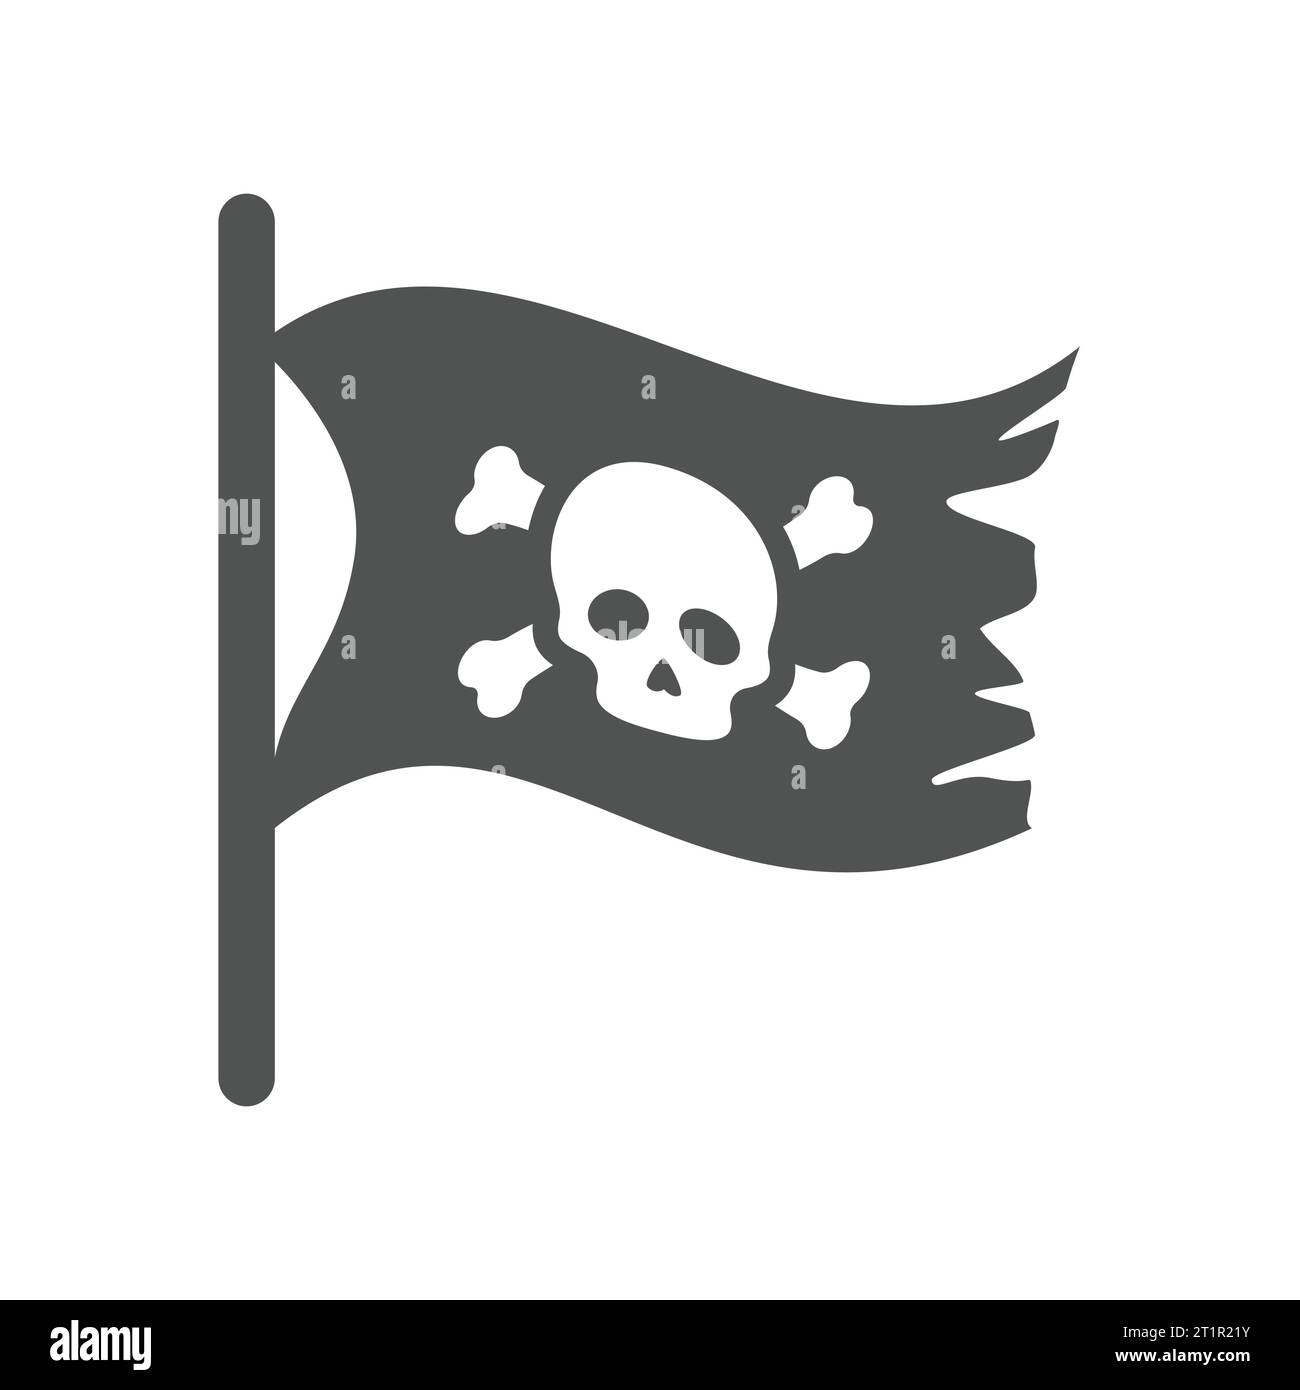 Pirate flag for little pirates - Little Pirate - Sticker